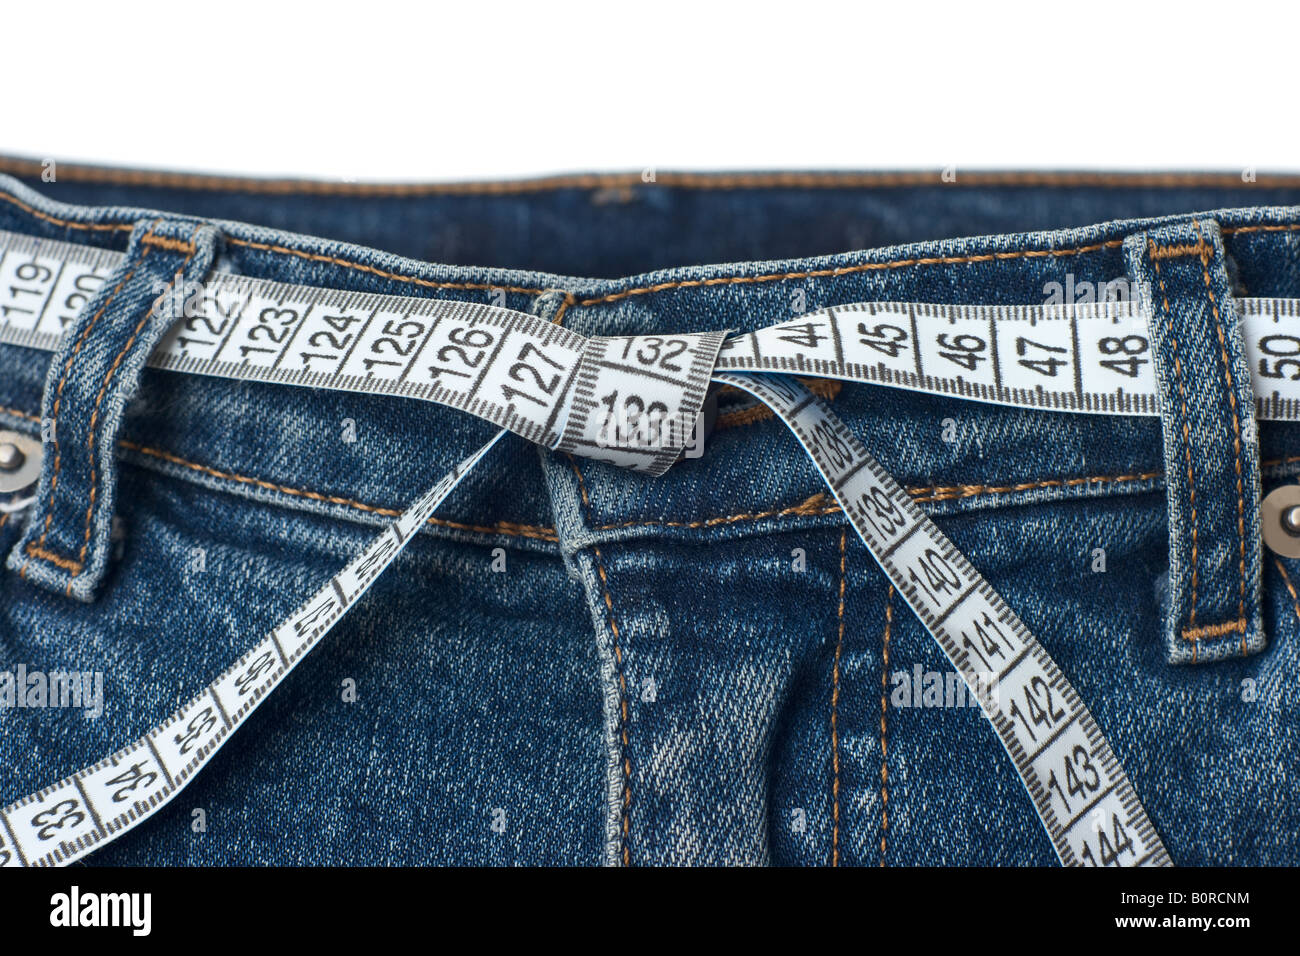 Waist check and excess weight control.  Pair of blue jeans with measuring tape as belt having tied knot isolated on white Stock Photo